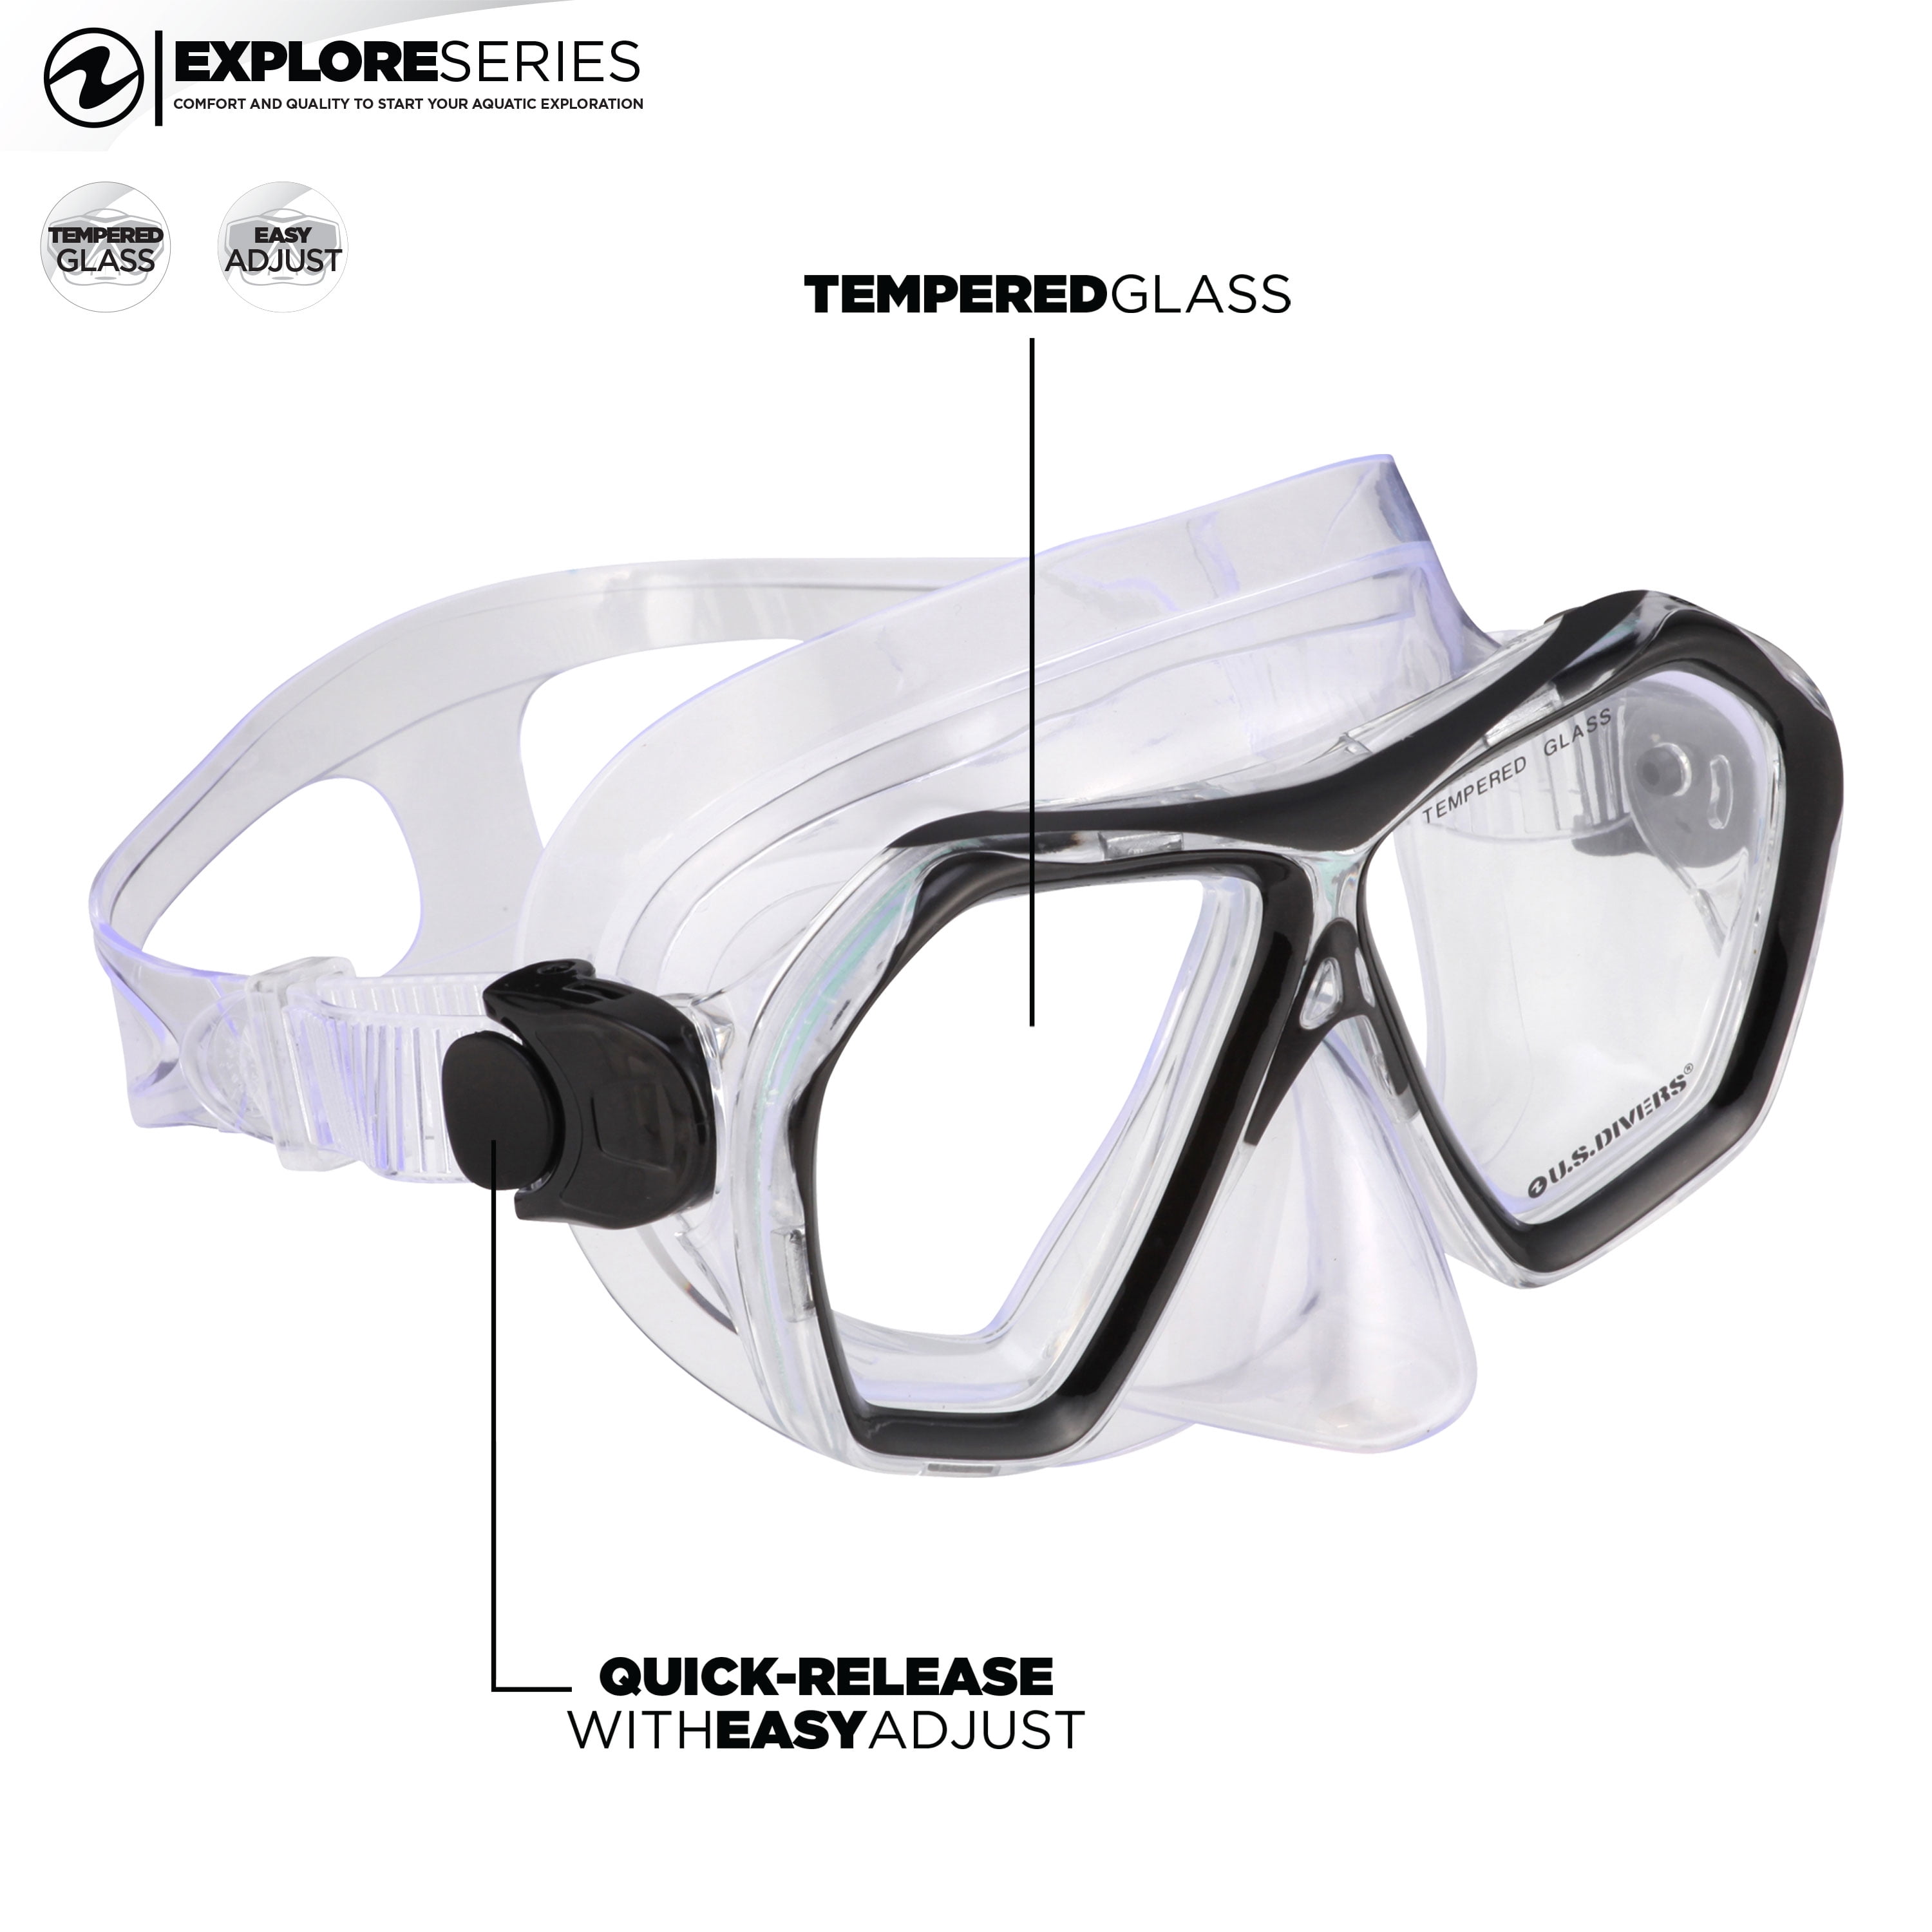 US DIVERS TEMPERED GLASS GOGGLES SWIM SCUBA SNORKEL CHOICE OF BLUE OR BLACK 